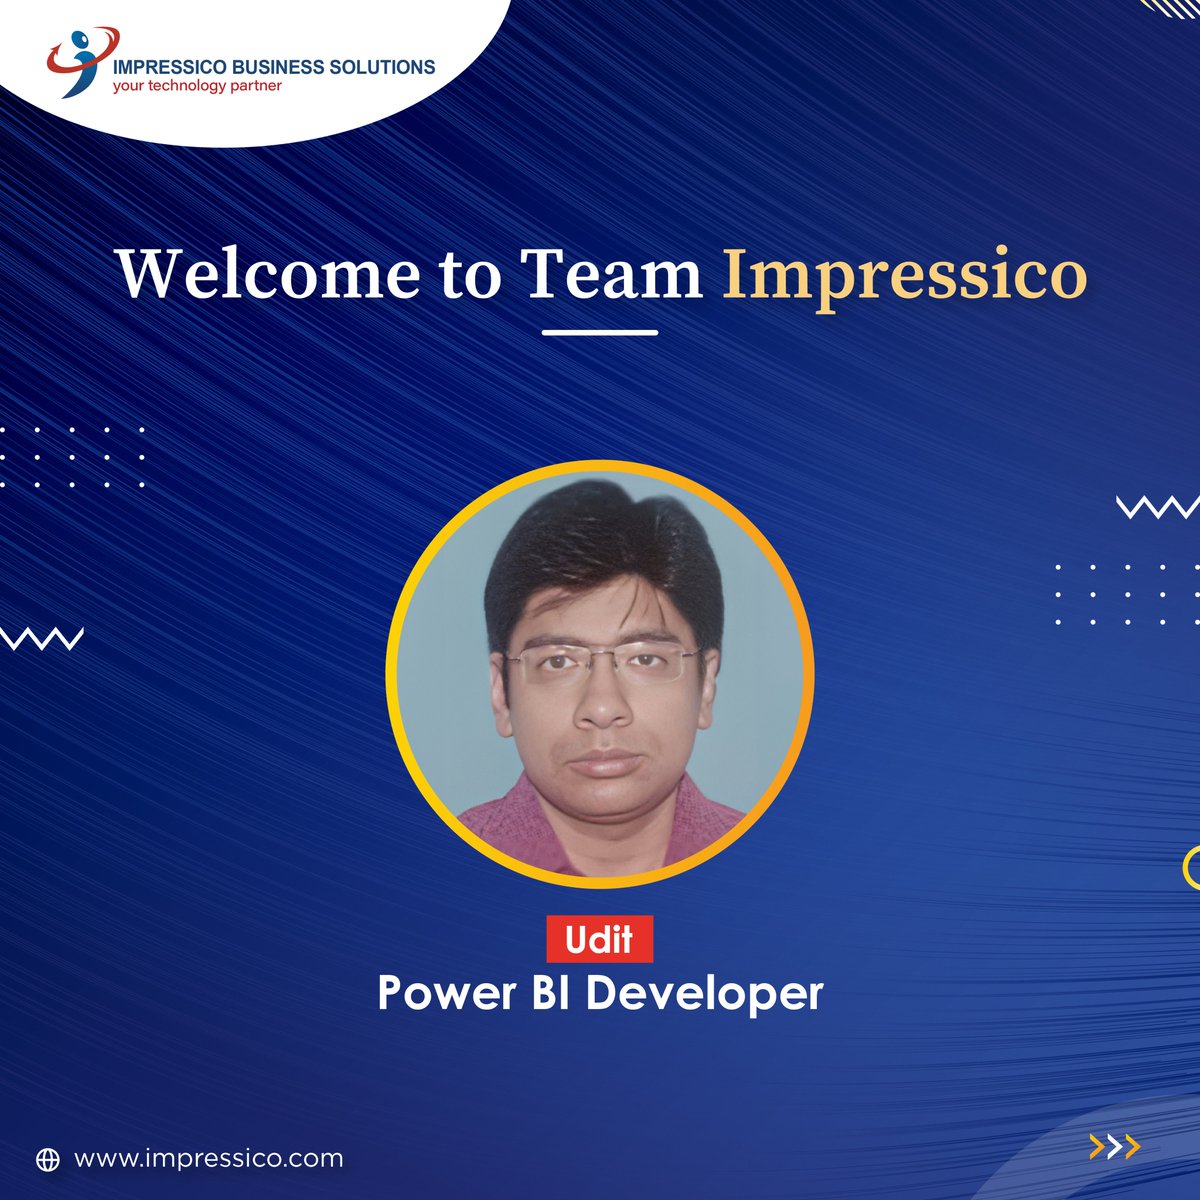 Welcome to Impressico Business Solutions! We are thrilled to welcome you onboard. We know you will be a valuable asset to the company. We wish you all the best in all your future endeavors! #jobs #jobopportunities #Joining #Impressico #YourTechnologyPartner #ourteam